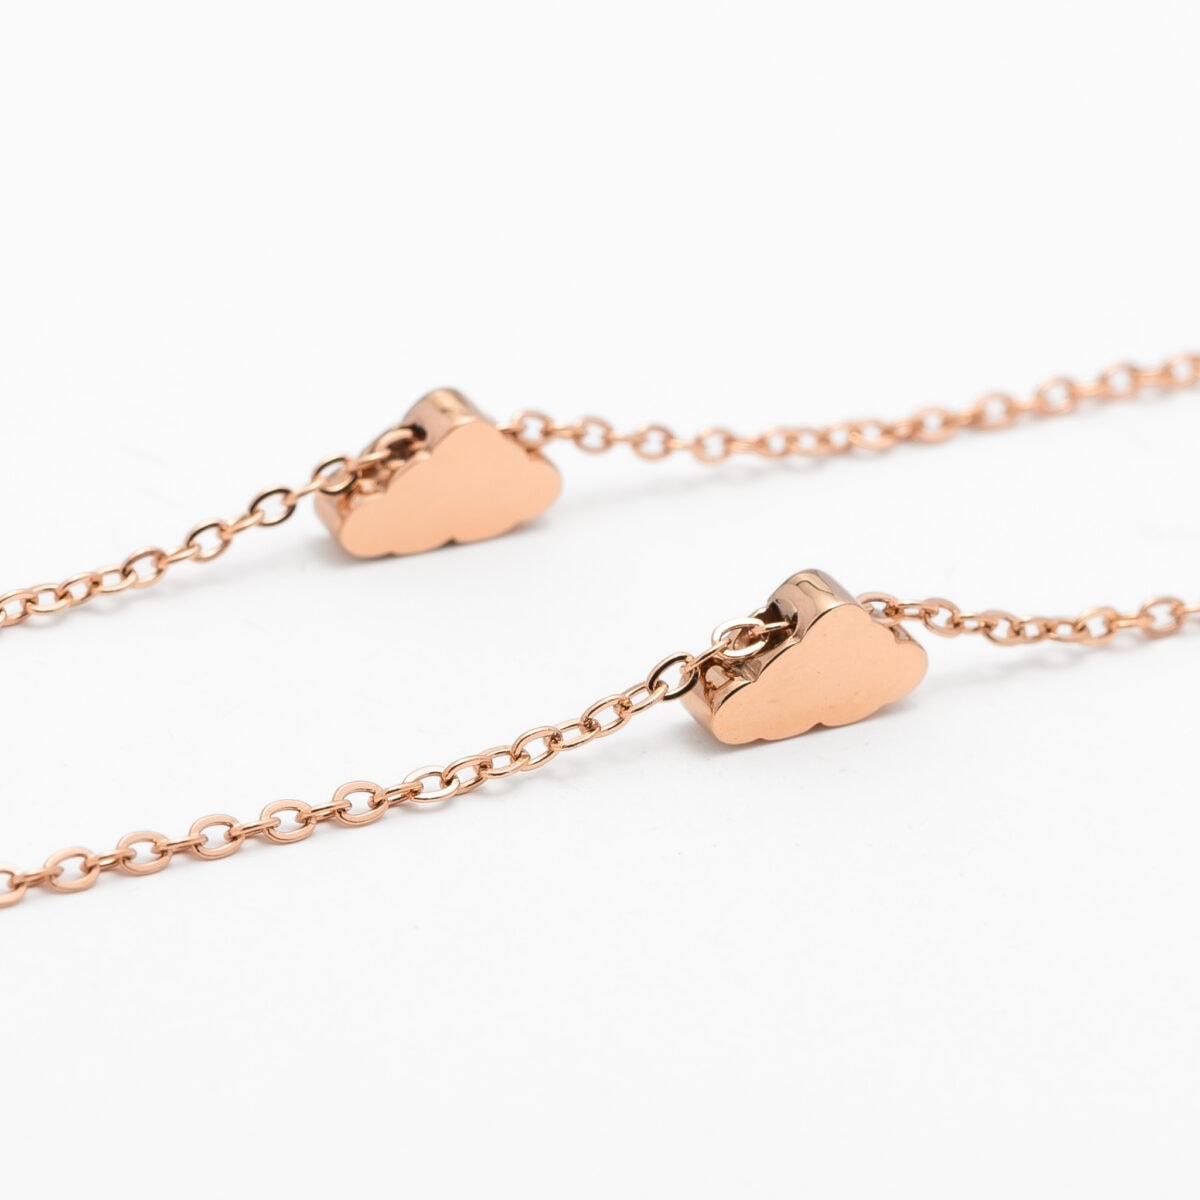 https://m.clubbella.co/product/volare-cloud-rose-gold-charm-necklace/ VOlare Cloud Rose Gold Charm (2)